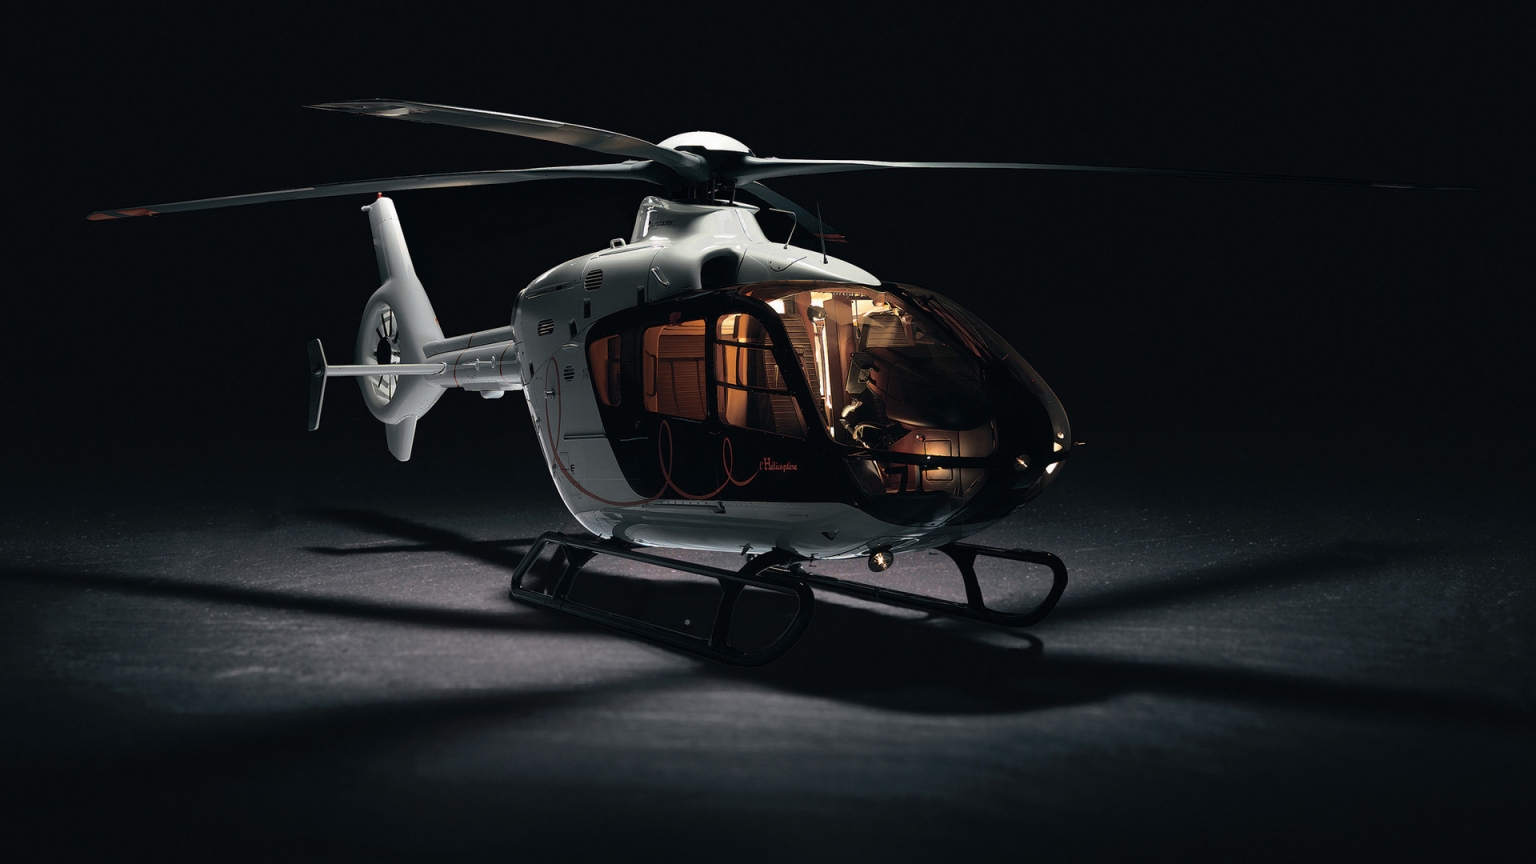 Eurocopter EC135 Helicopter for 1536 x 864 HDTV resolution